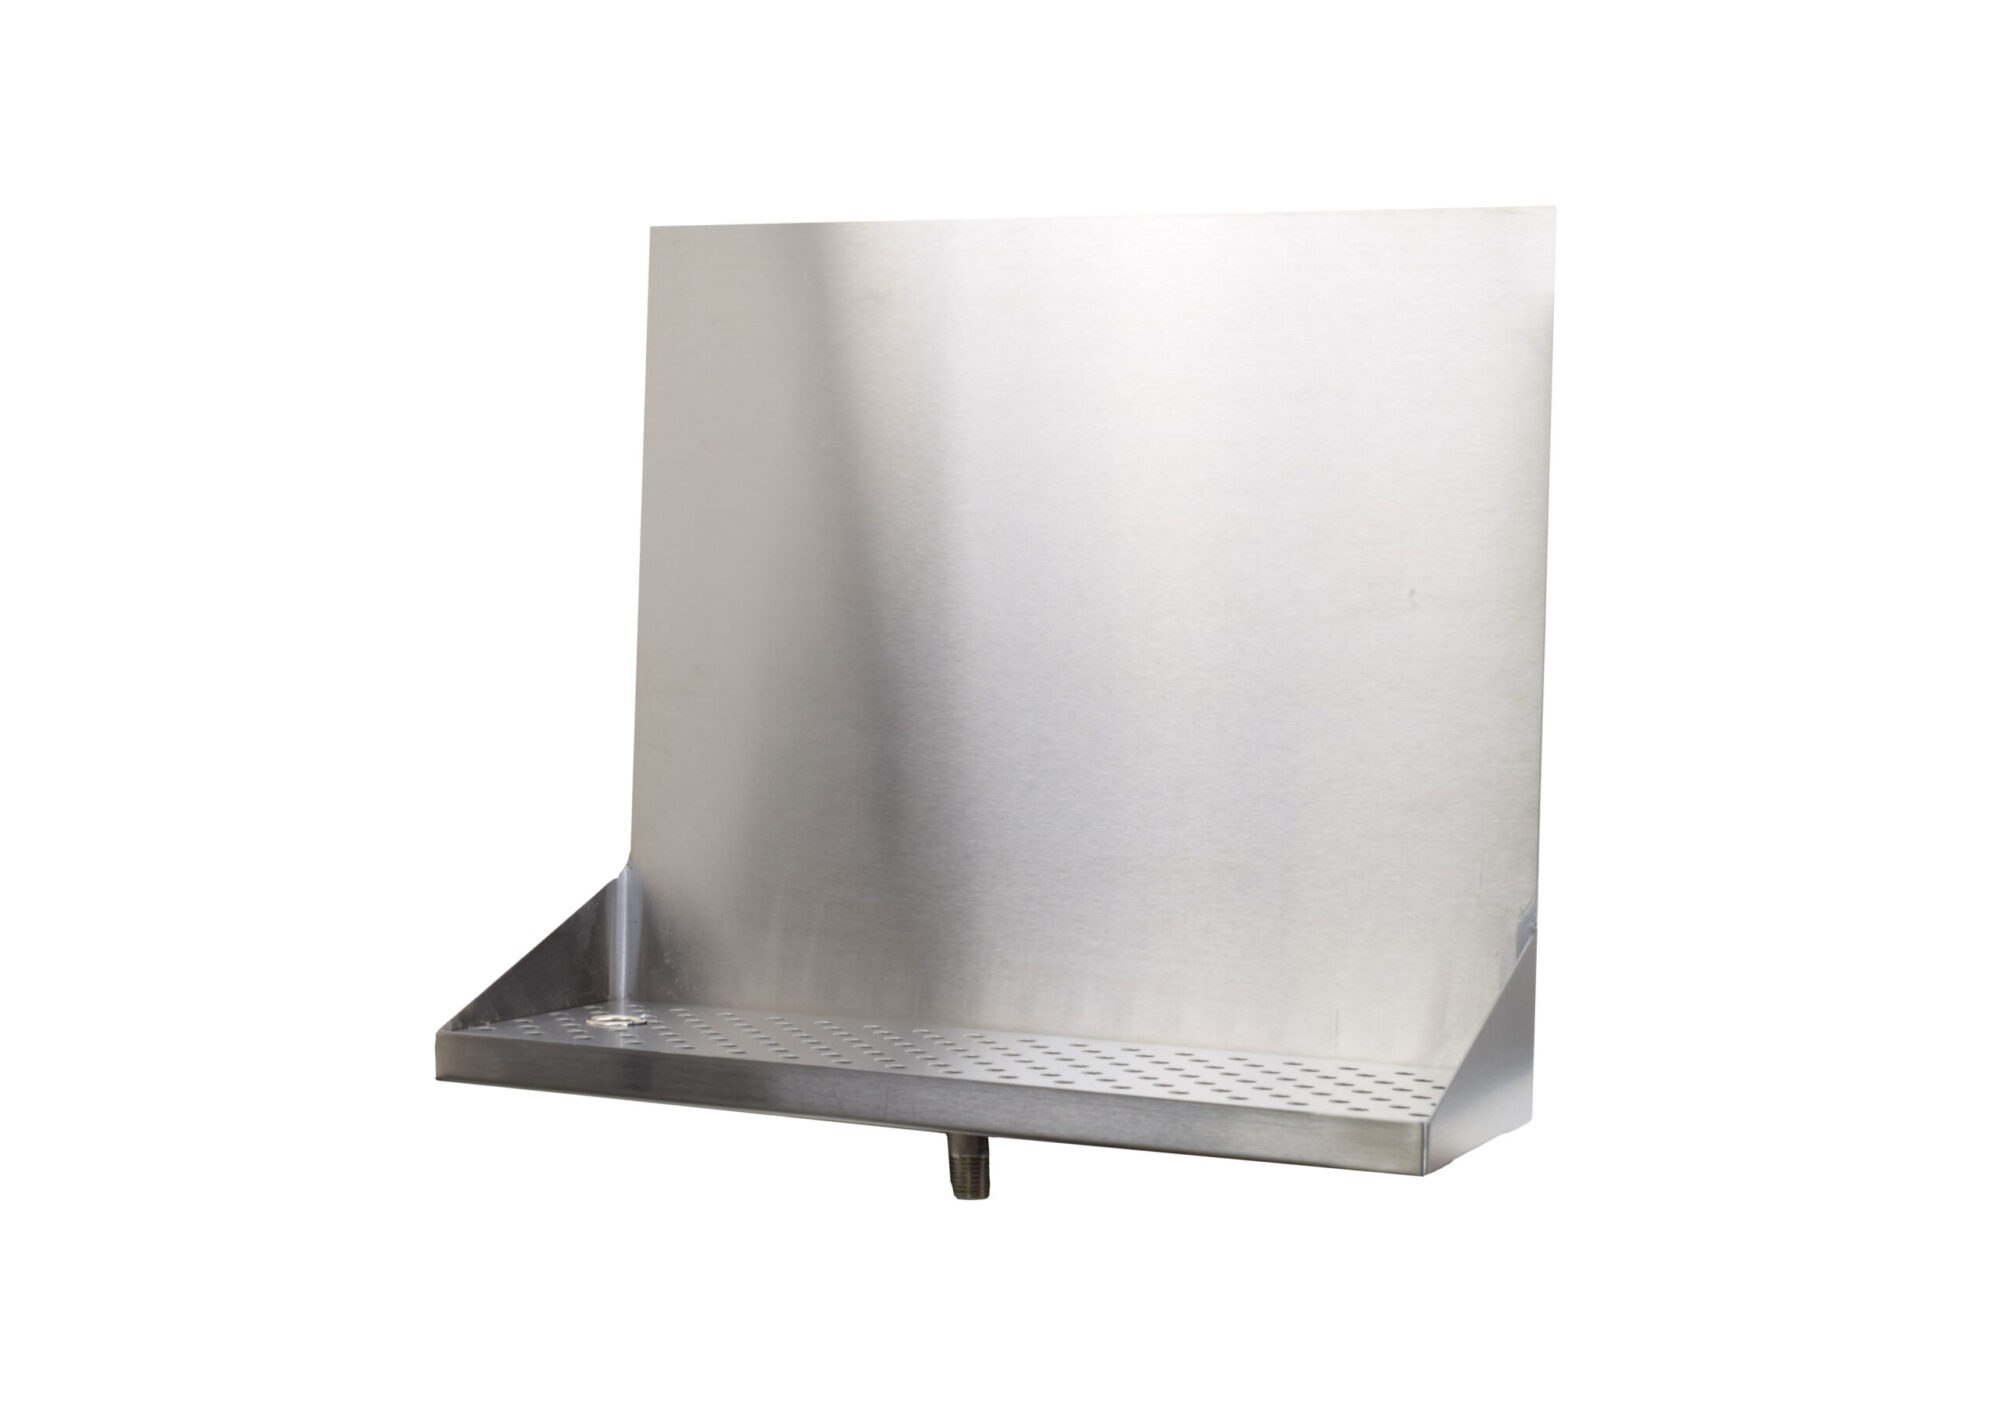 518-120T Stainless Steel Wall Mount Tray with 1/2" NPT Welded Drain - 12"L x 8"W x 18"H - No Holes